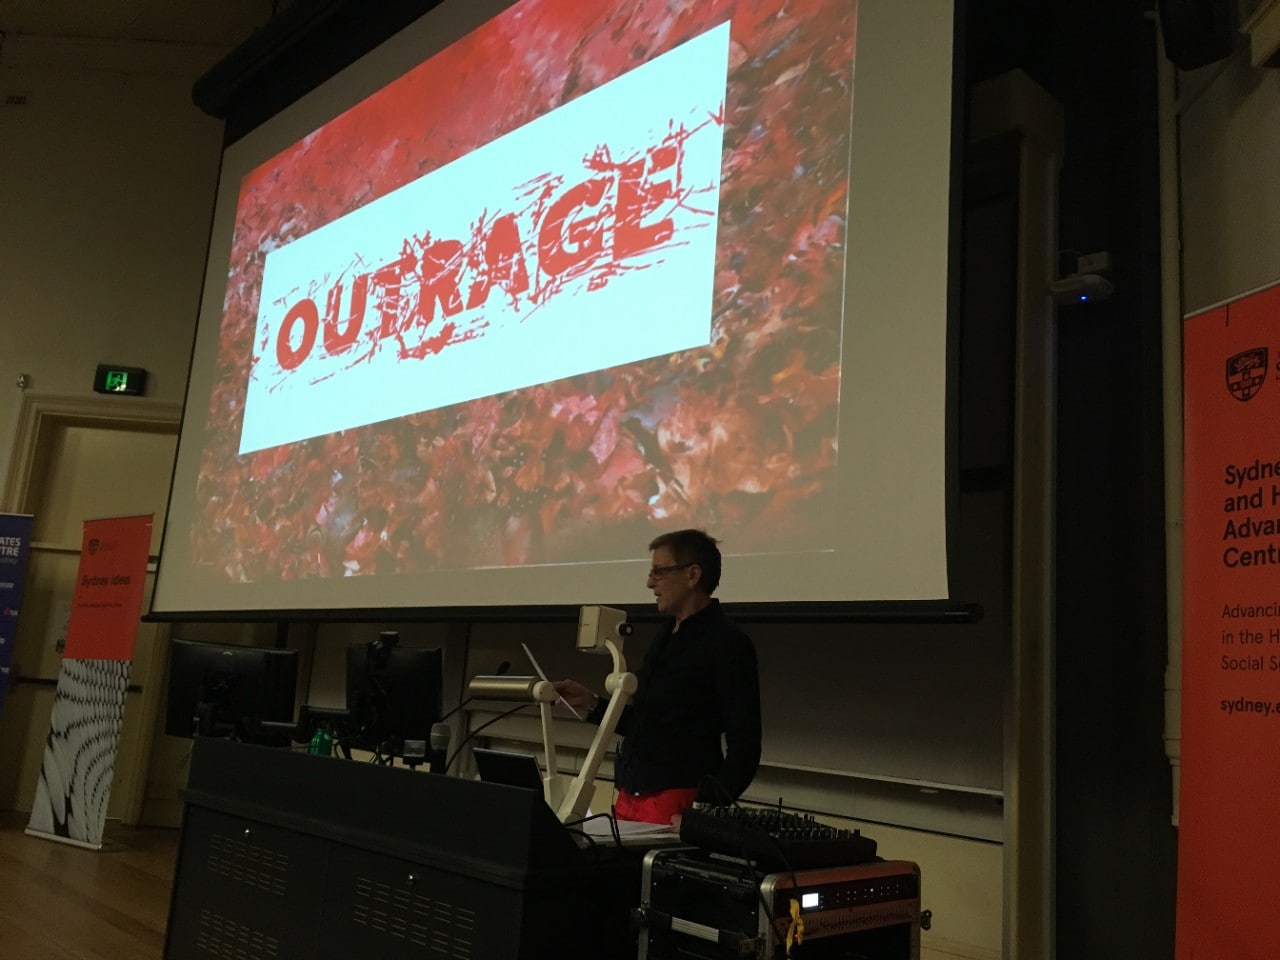 Robyn Wiegman at the public lecture on “Outrage: The Psychic Life of Trump’s America” for Sydney Ideas. 